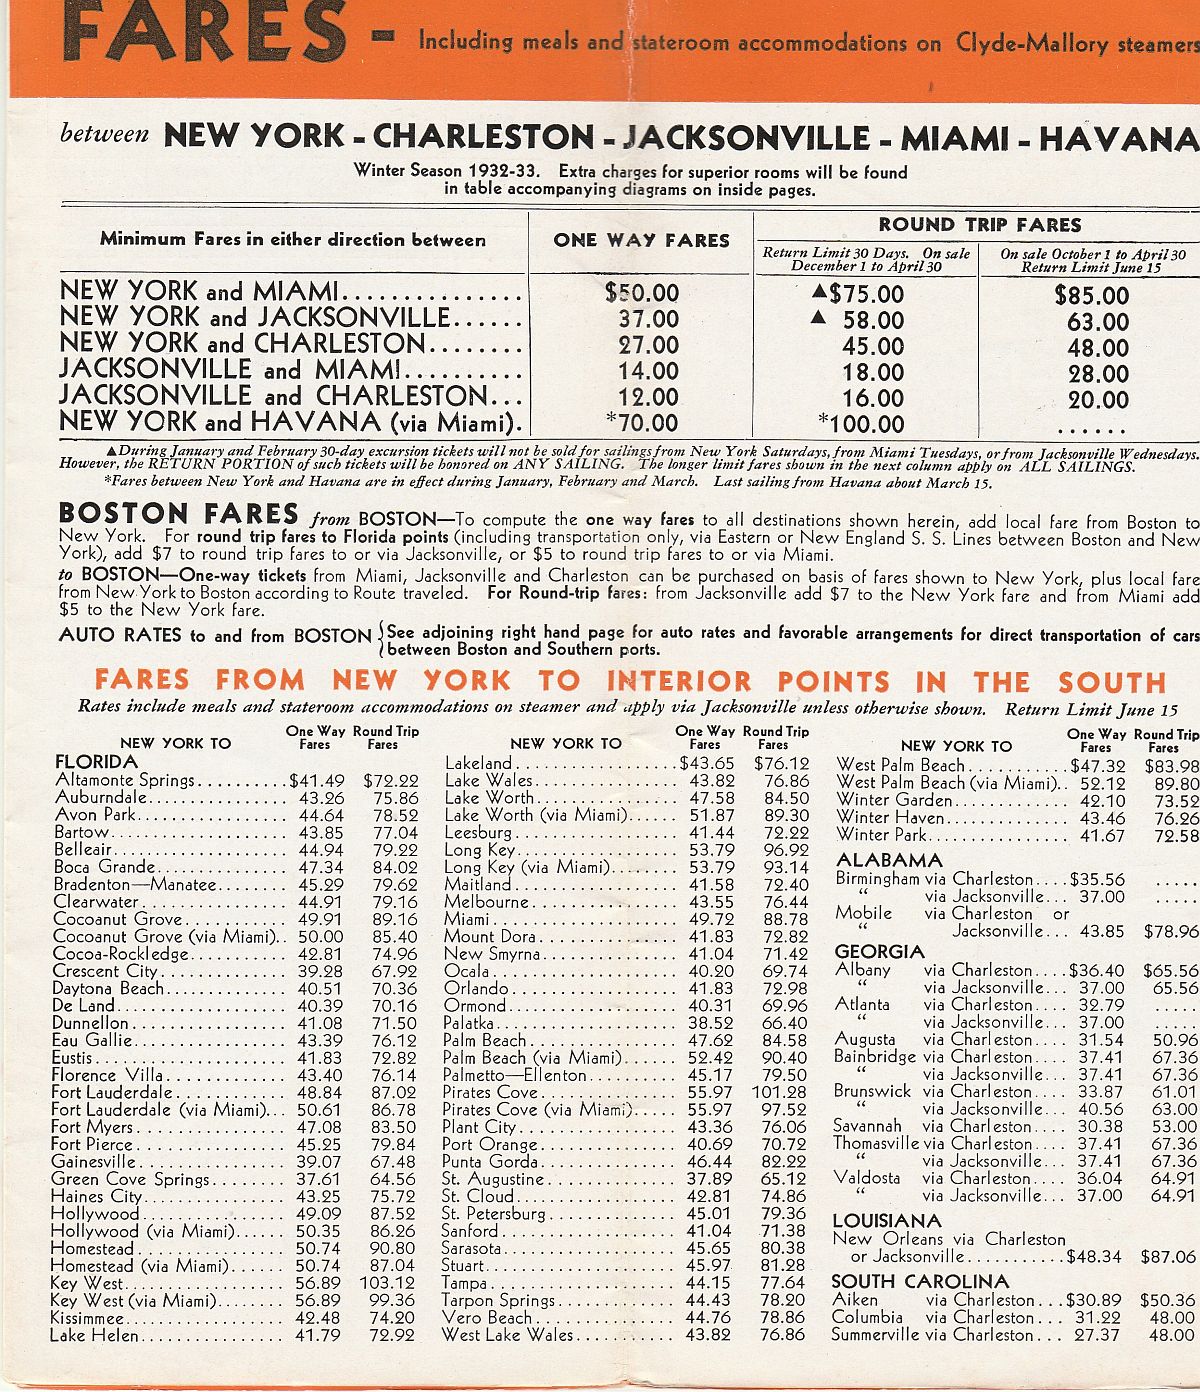 Clyde-Mallory Lines Fares: Including meals and stateroom accommodations on Clyde-Mallory steamers